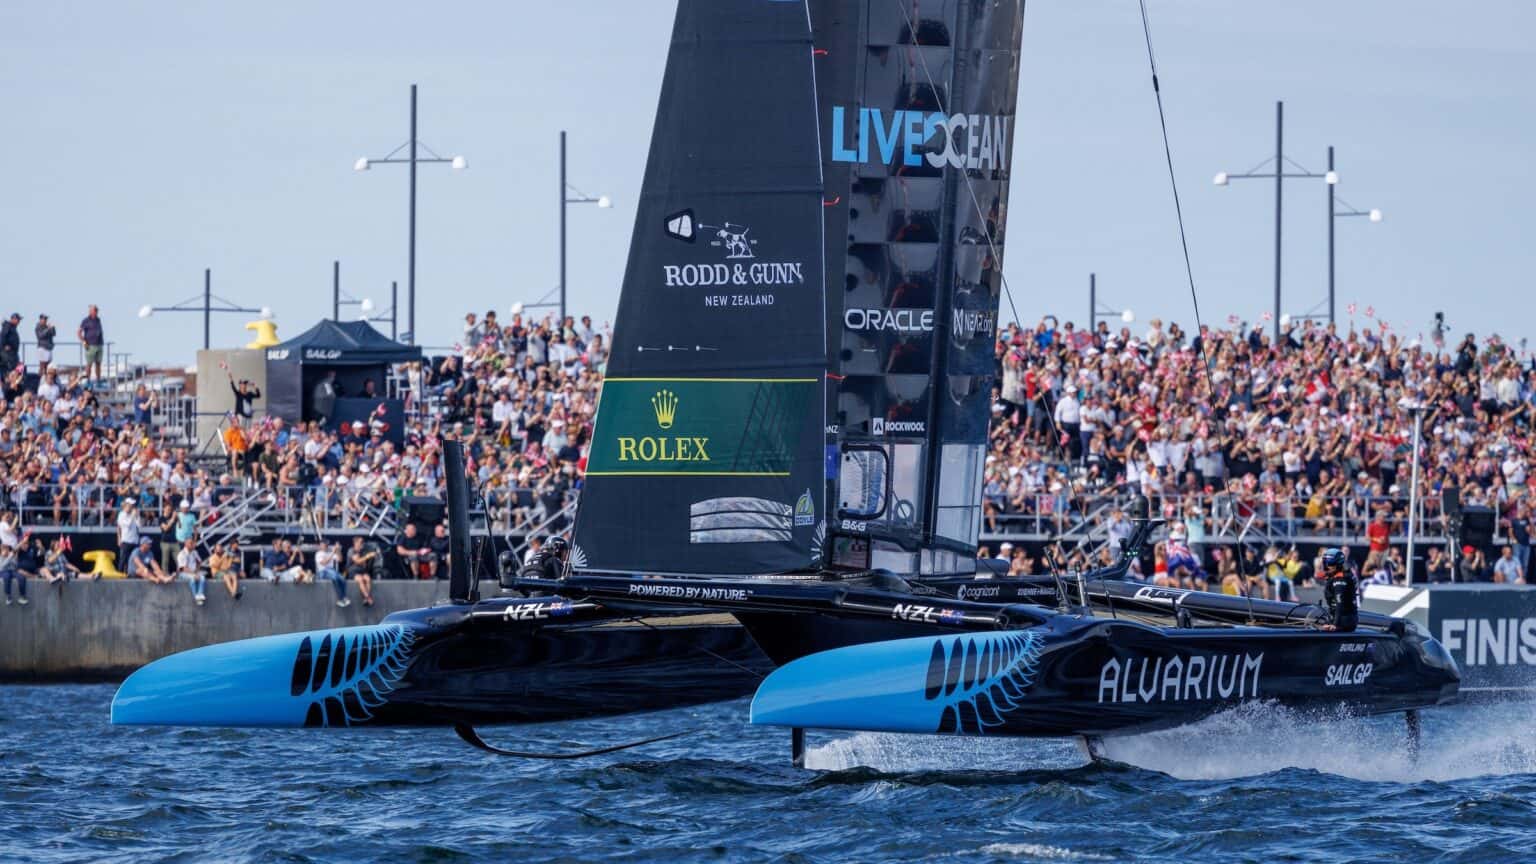 eBlue_economy_New Zealand has claimed its second win in a row of fleet race